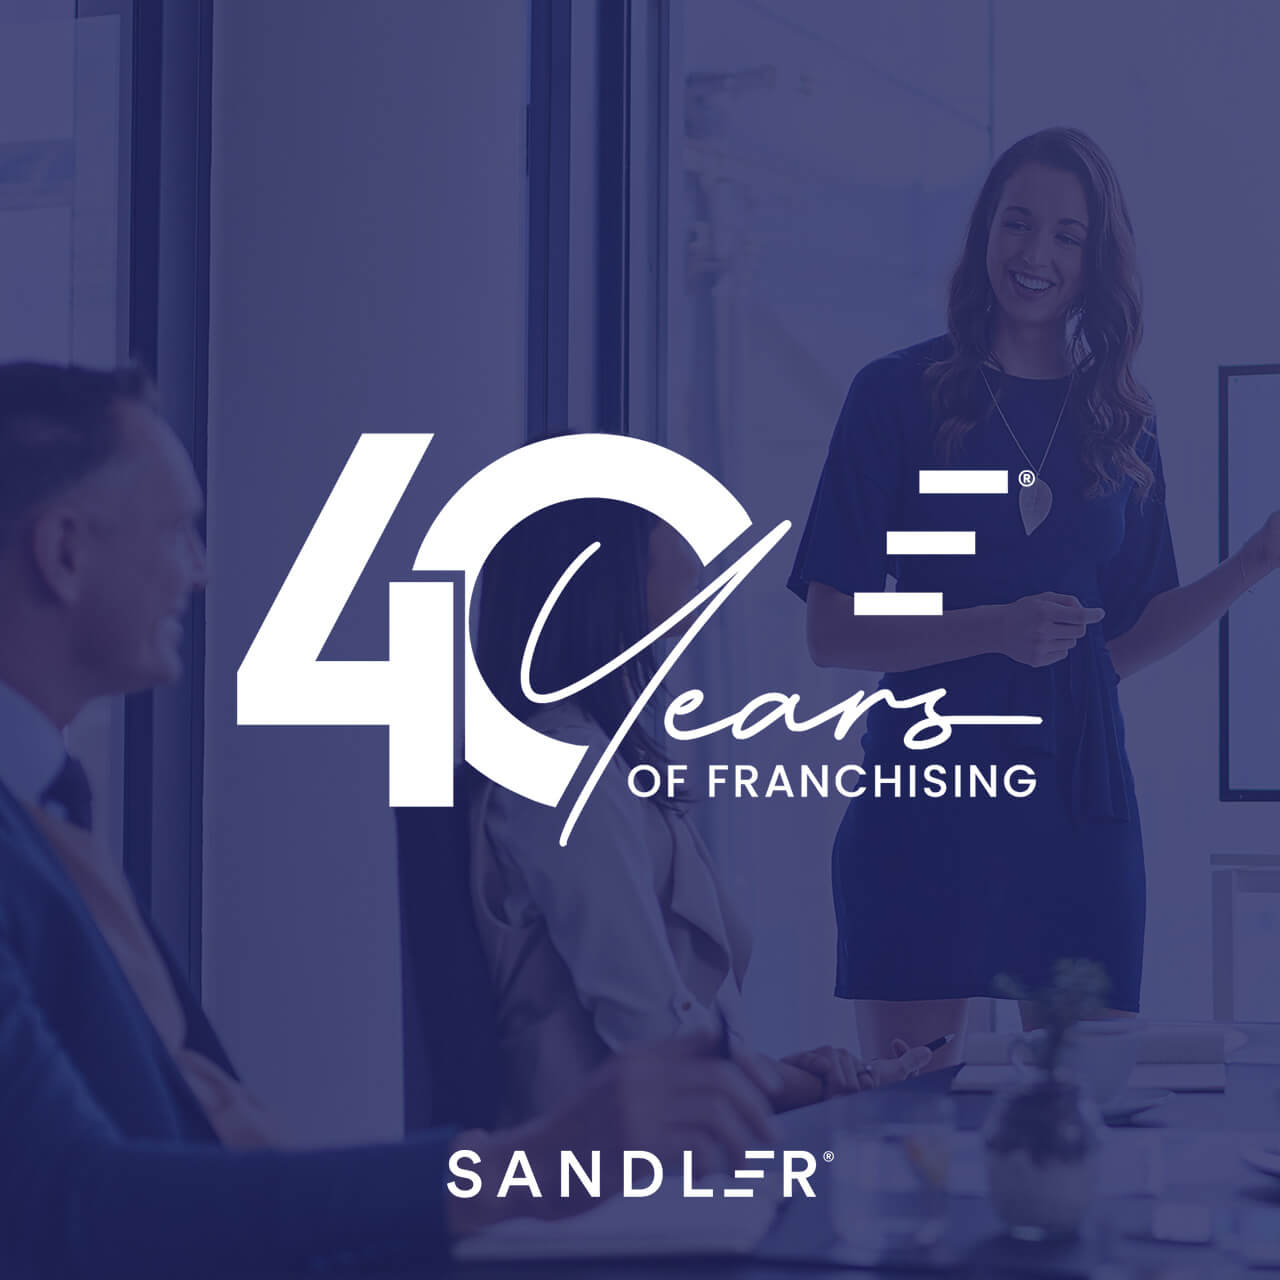 Sandler Celebrates 40 Years of Franchise Success in Empowering Sales Mastery